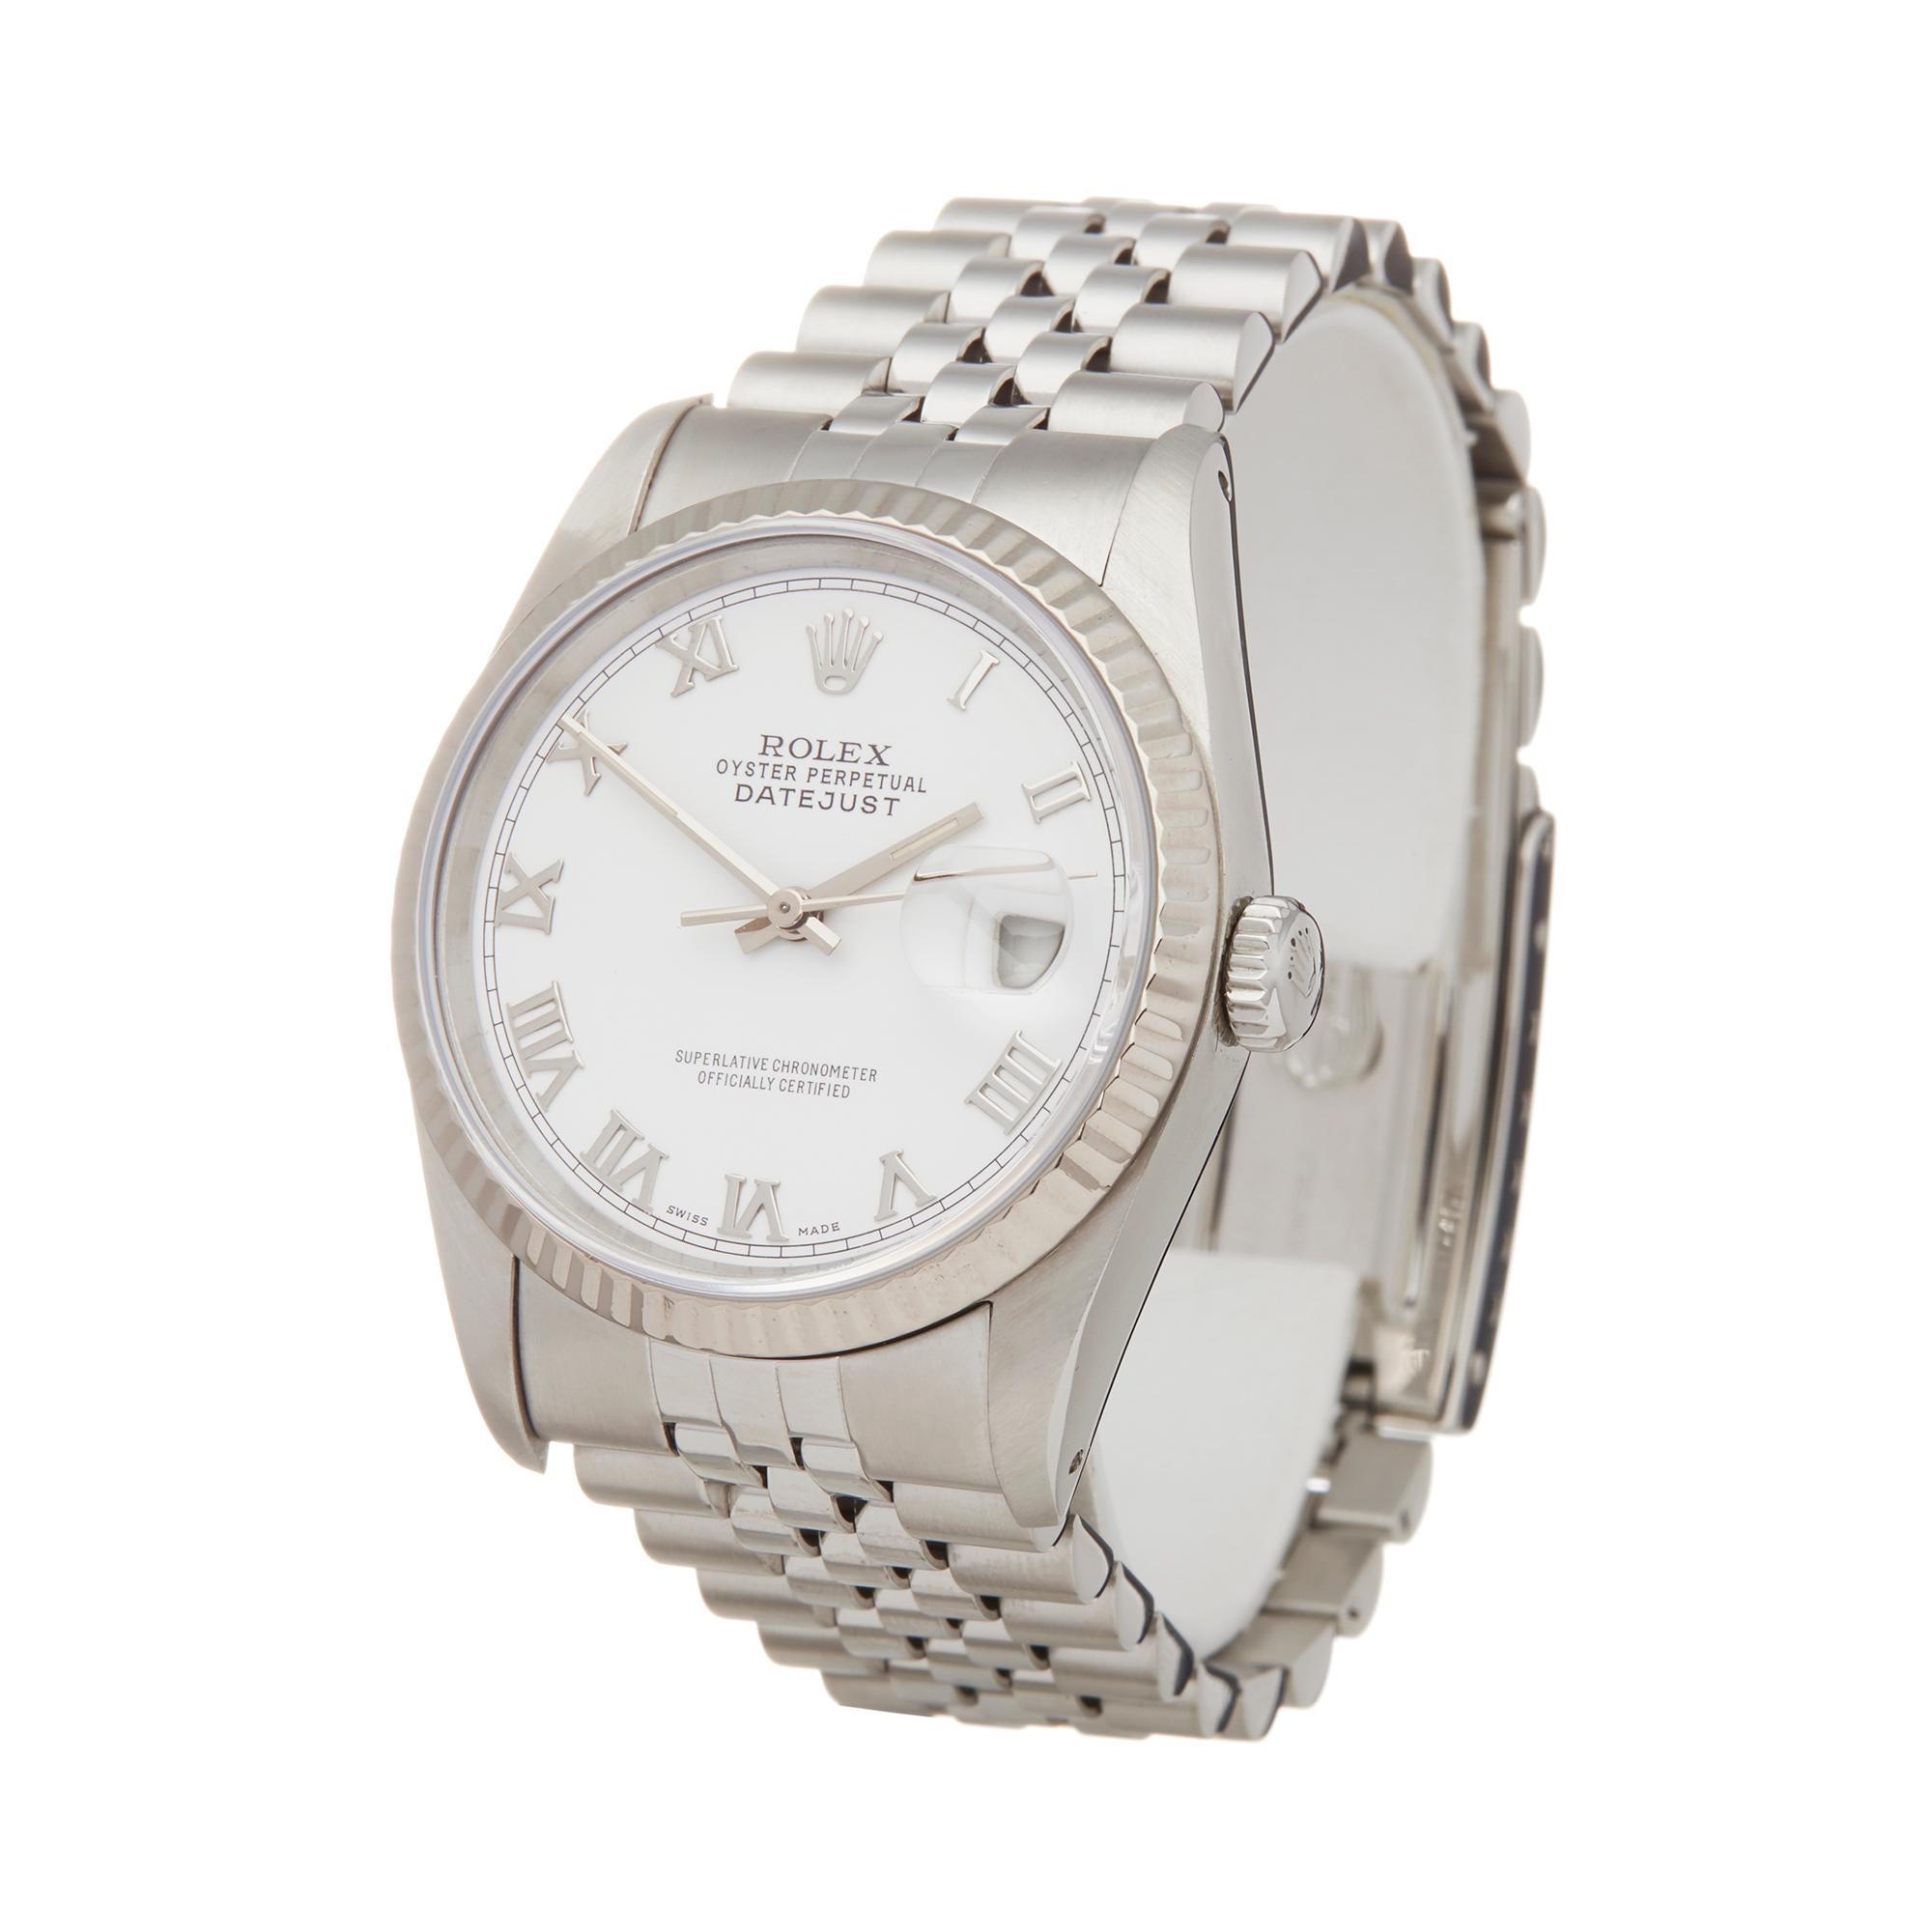 Reference: W5715
Manufacturer: Rolex
Model: Datejust
Model Reference: 16234
Age: Circa 1990
Gender: Men's
Box and Papers: Box Only
Dial: White Roman
Glass: Sapphire Crystal
Movement: Automatic
Water Resistance: To Manufacturers Specifications
Case: